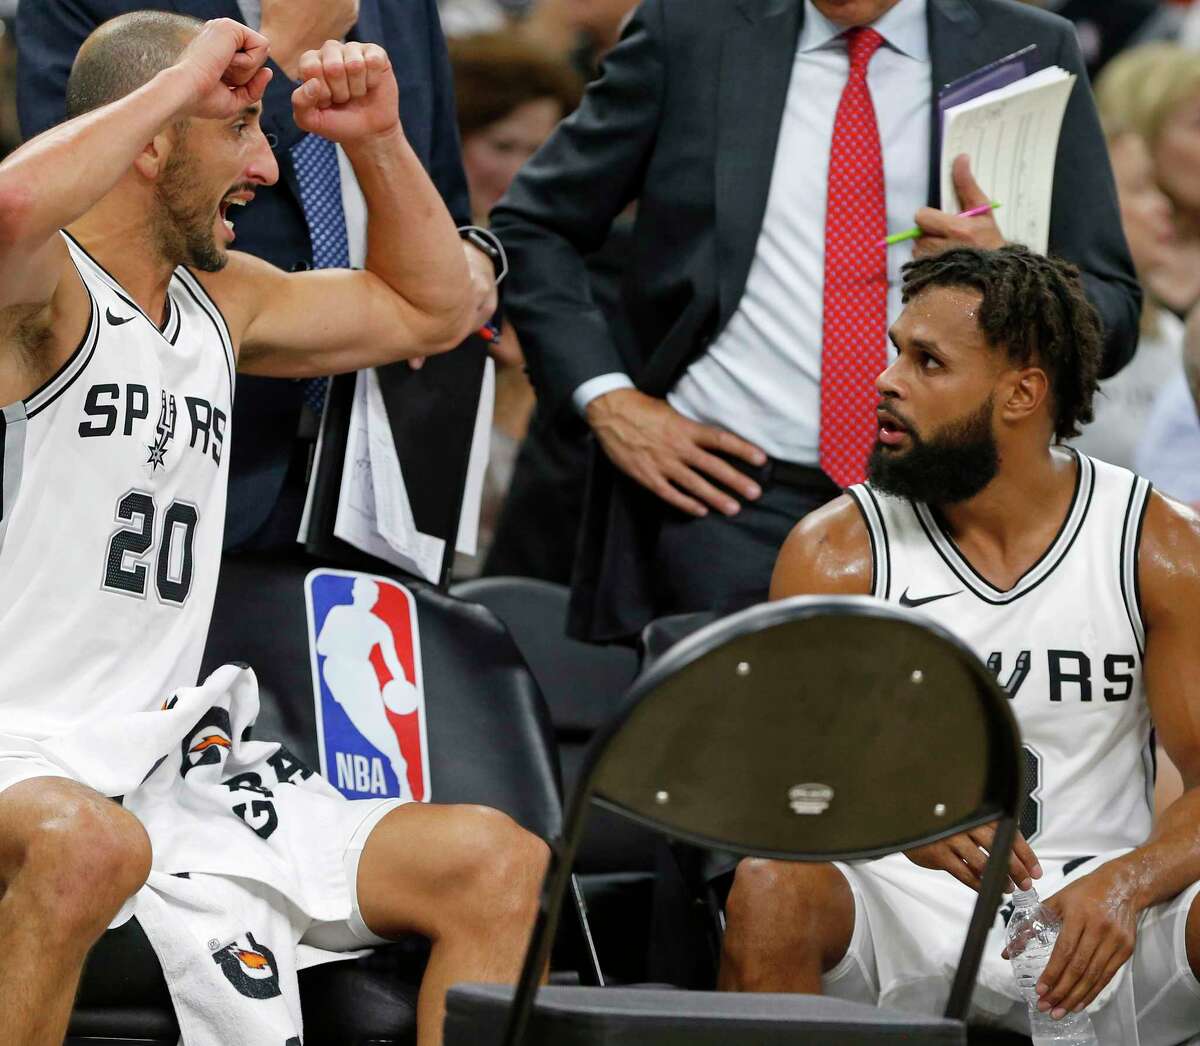 San Antonio SpursÕ Manu Ginobili talks with Patty Mills on the bench during a second half timeout against the Toronto Raptors Monday Oct. 23, 2017 at the AT&T Center. The Spurs won 101-97.